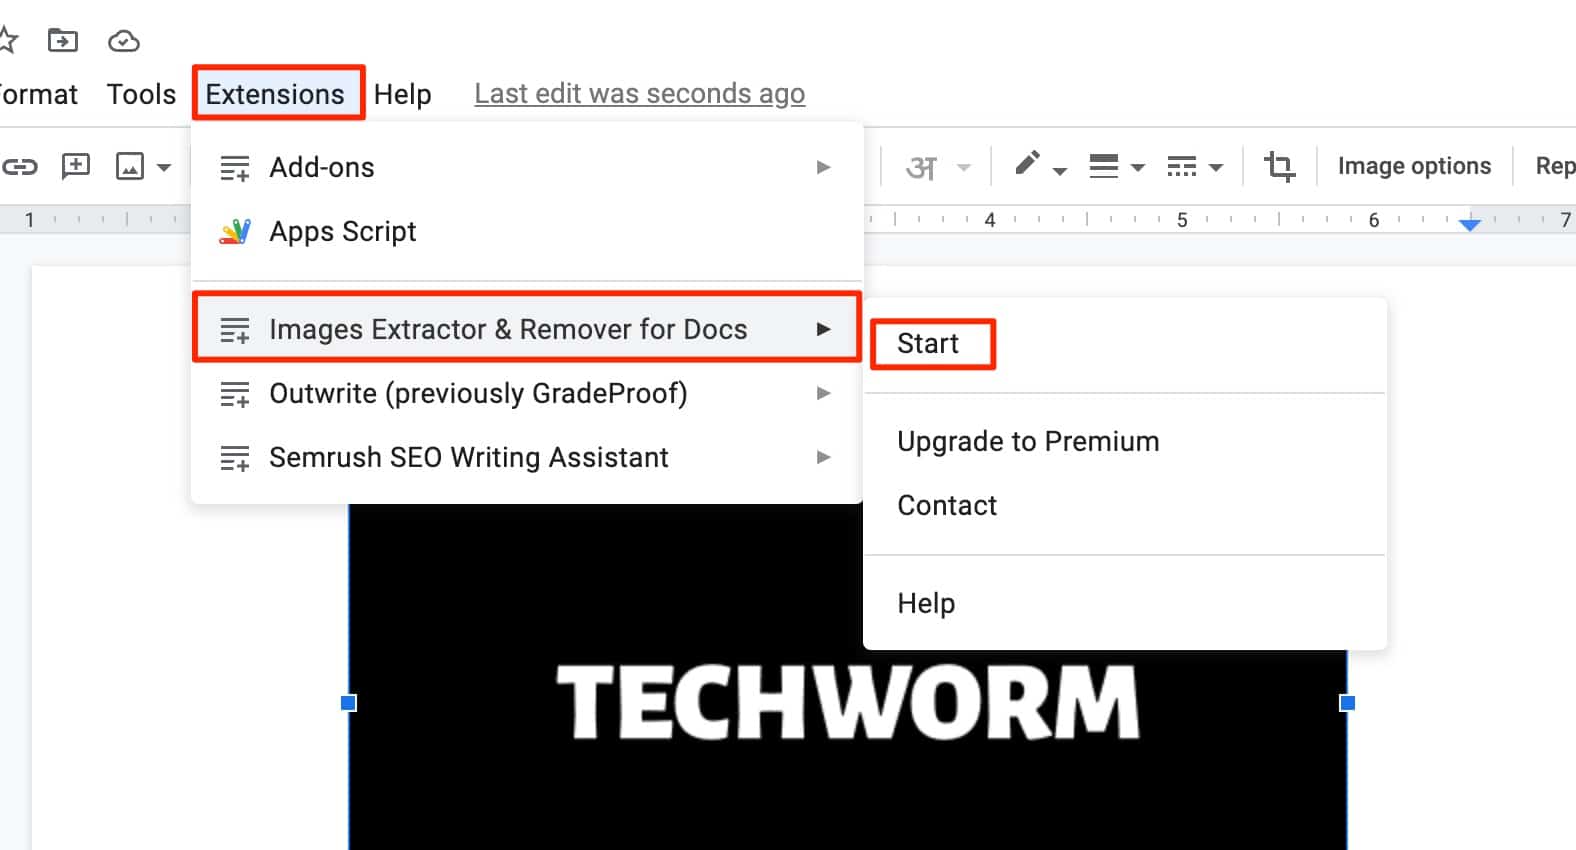 Start the Image Extractor add-on in Google Docs